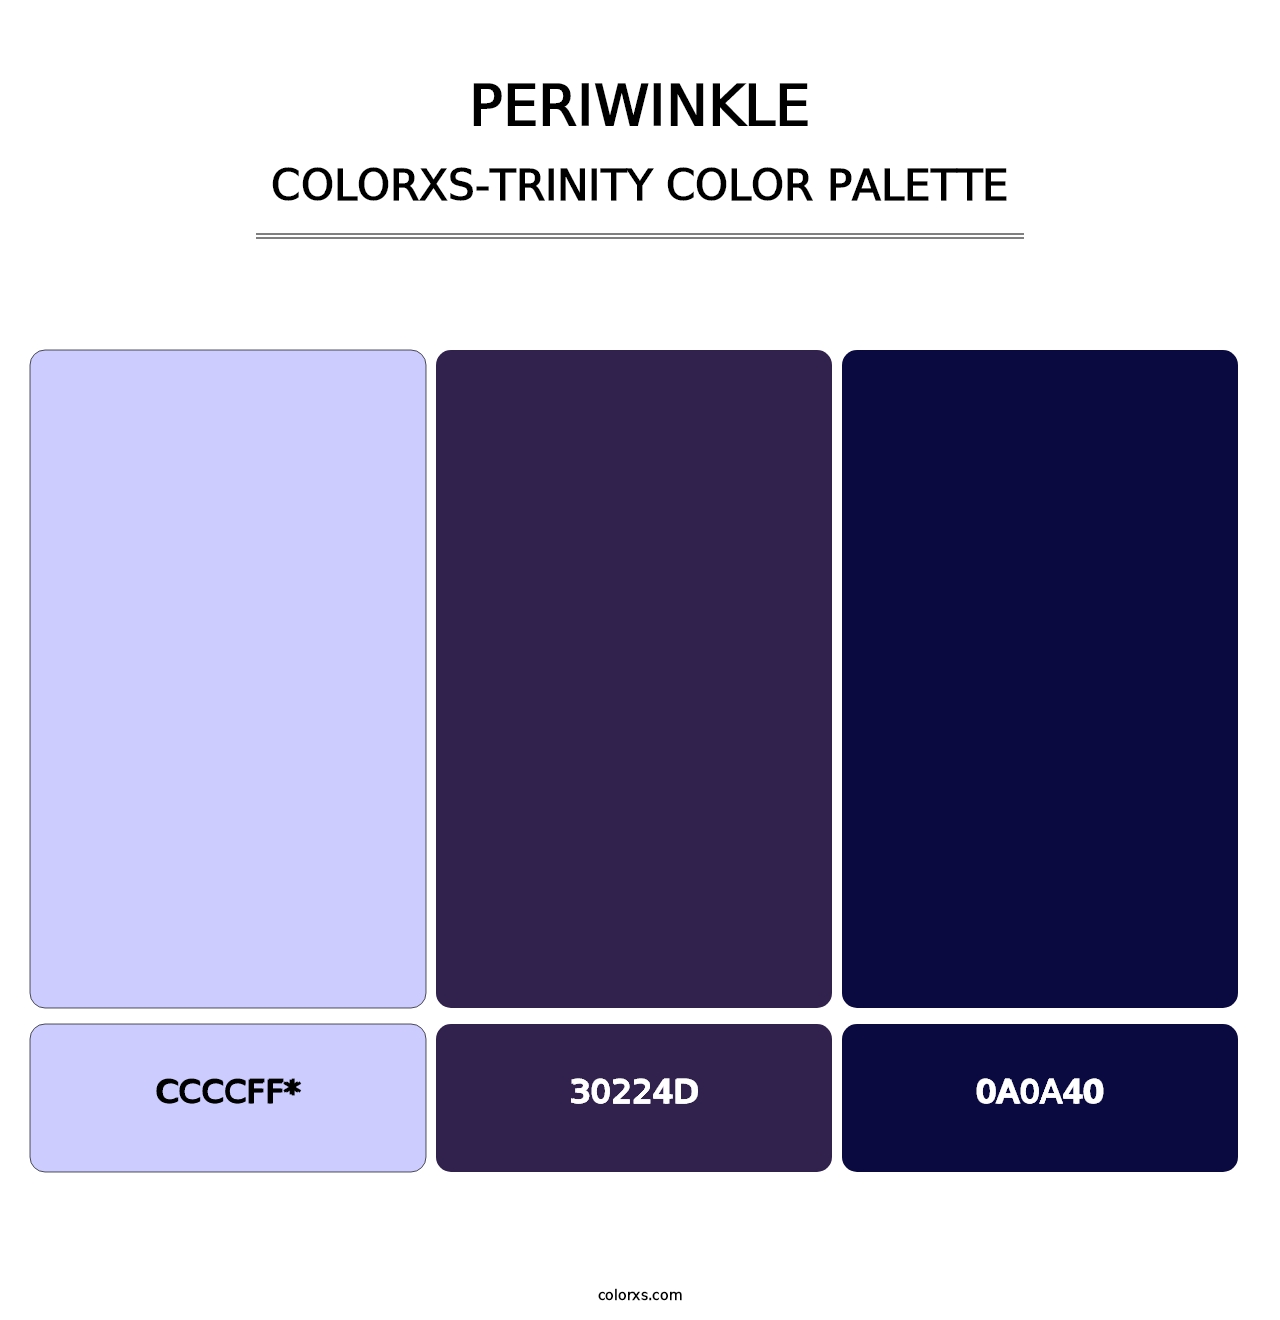 Periwinkle - Colorxs Trinity Palette